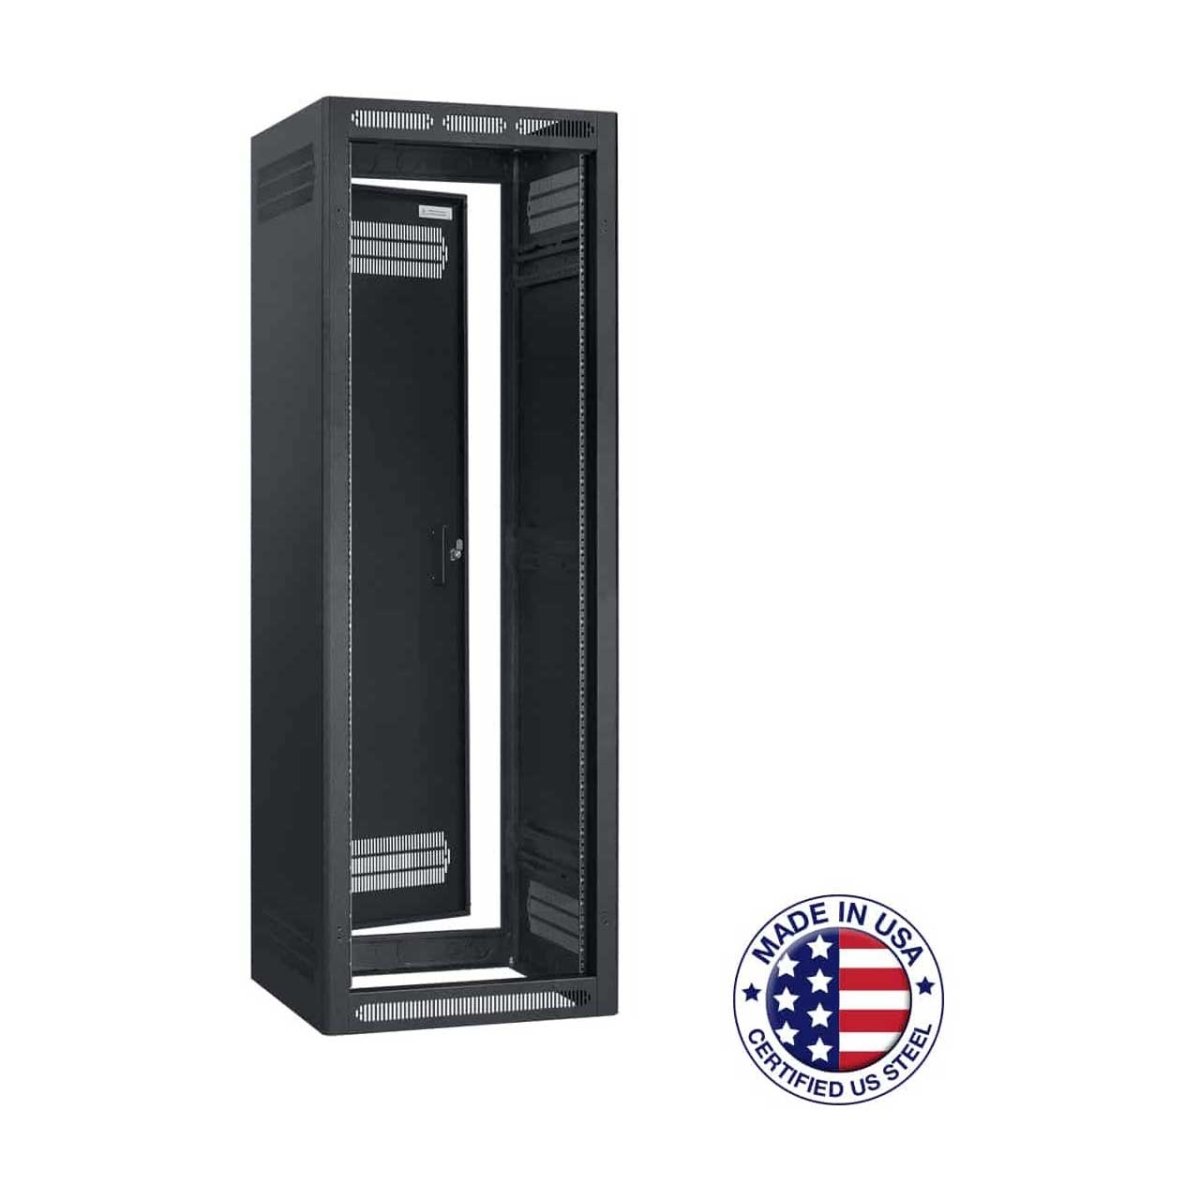 Picture of Lowell Manufacturing LMC-LER-3532 LER-3532 35RU Enclosed Rack with Rear Door - 32 in. Deep